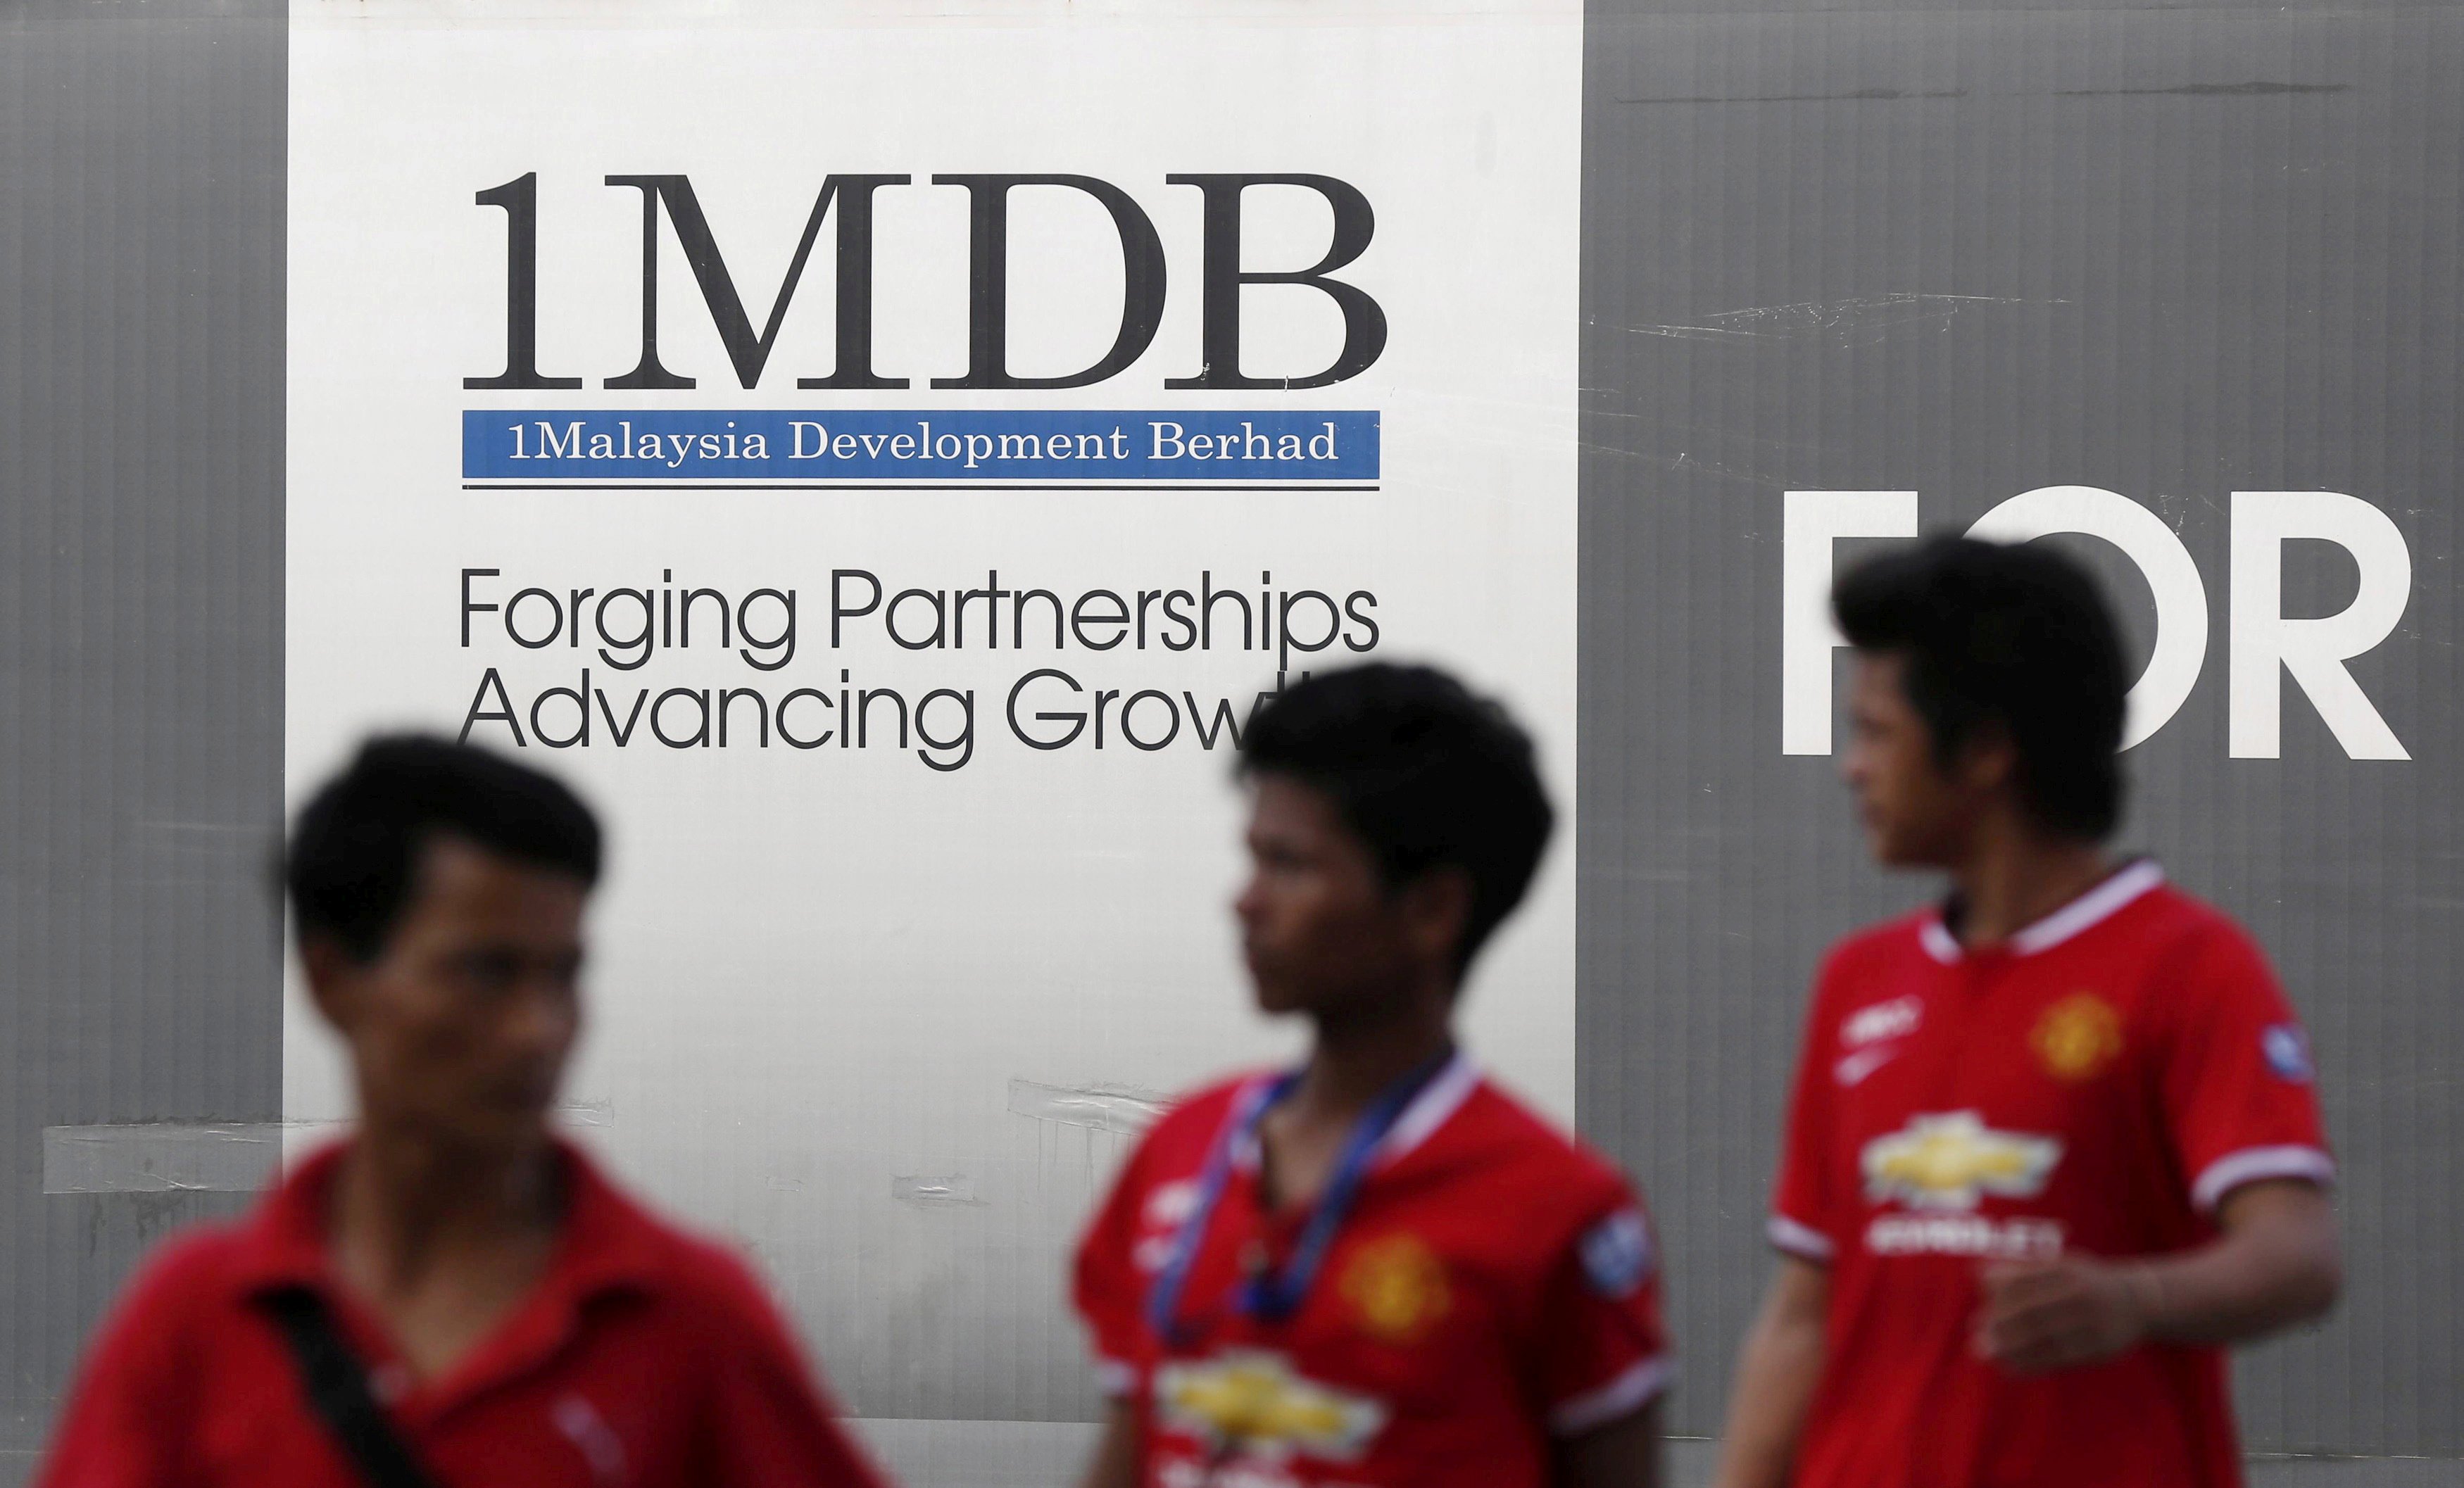 Men walk past a 1MDB billboard in Kuala Lumpur on March 1, 2015. Malaysian authorities say they have recouped about US$5 million in assets related to the 1MDB scandal. Photo: Reuters